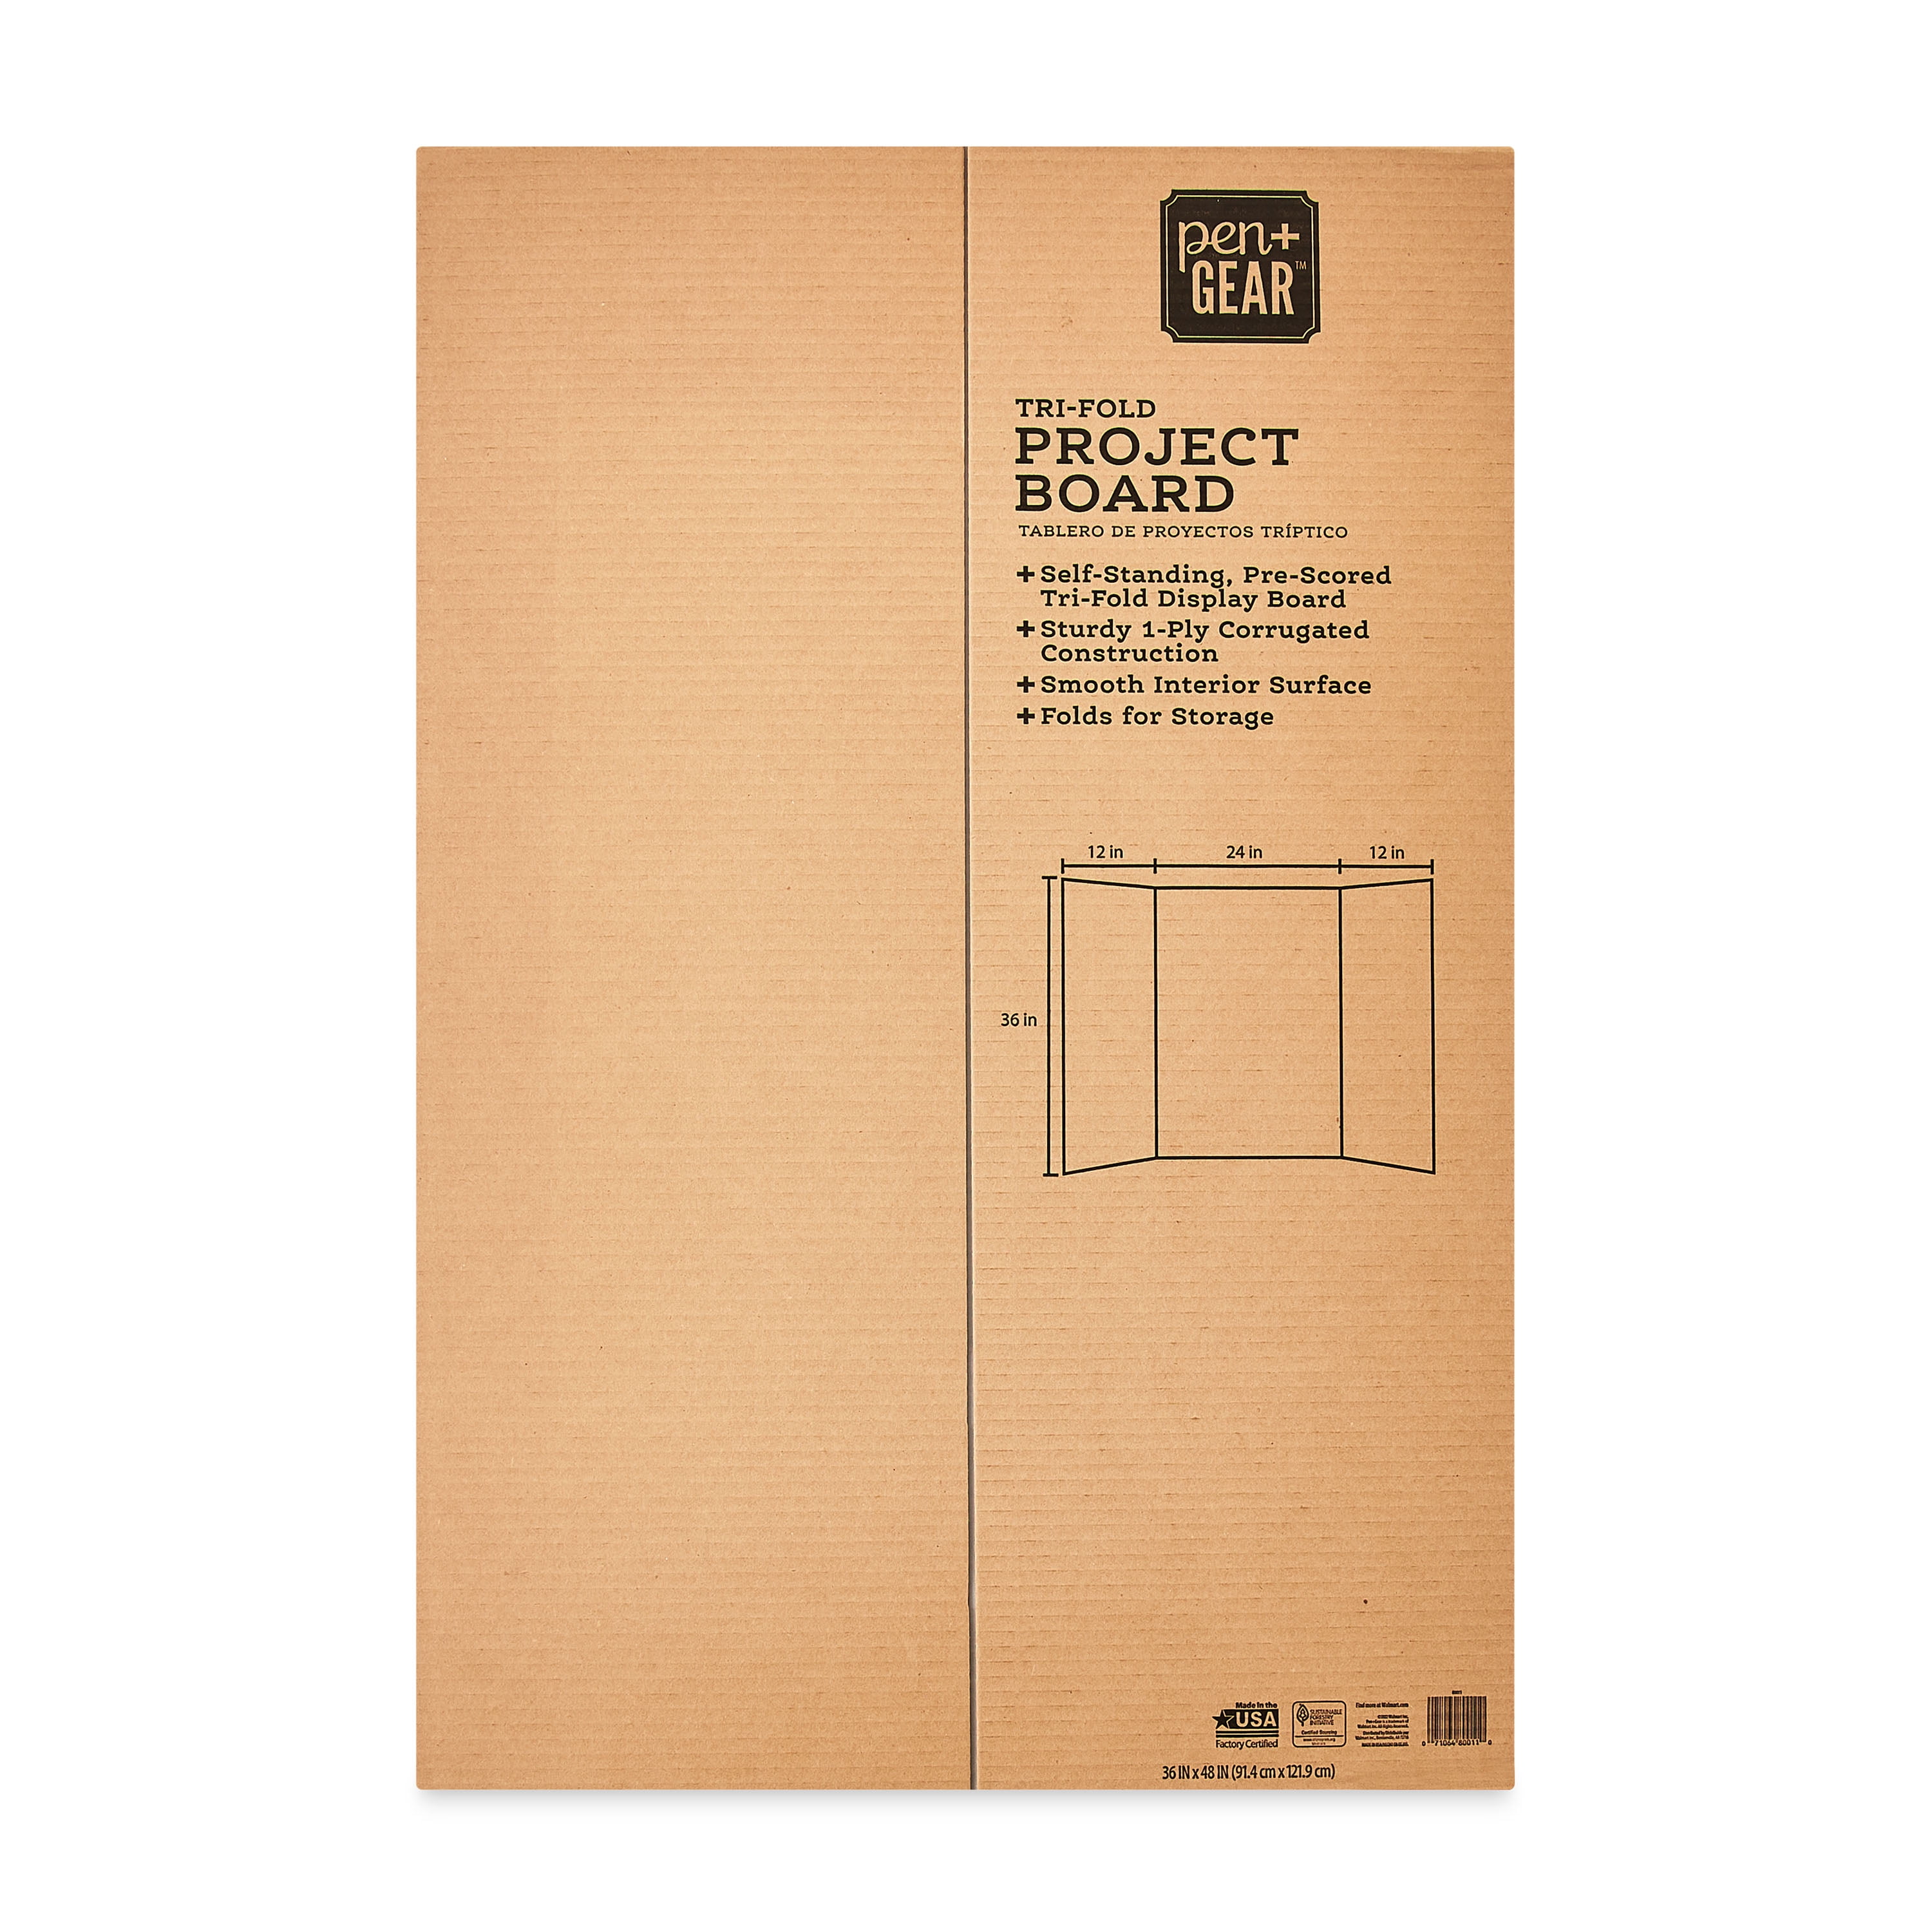 Two Cool Tri-Fold Poster Board, 24 x 36, White/White - Reliable Paper